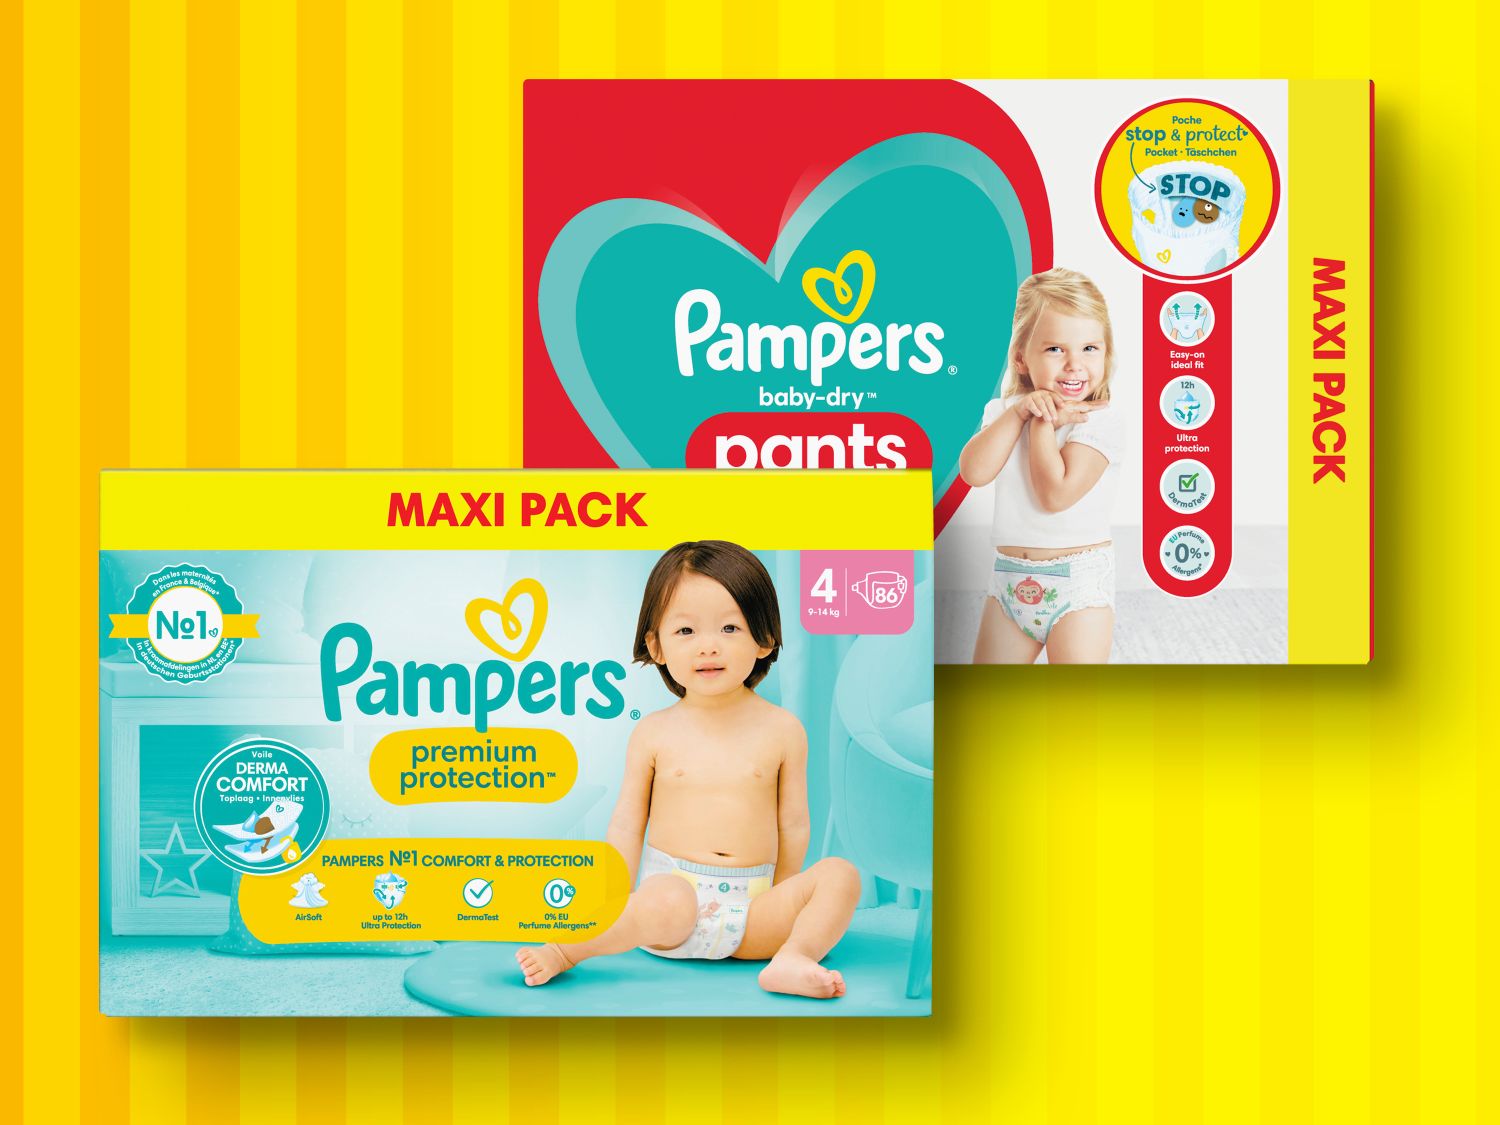 Premium Lidl Dry/Pants Protection/Baby - Pampers